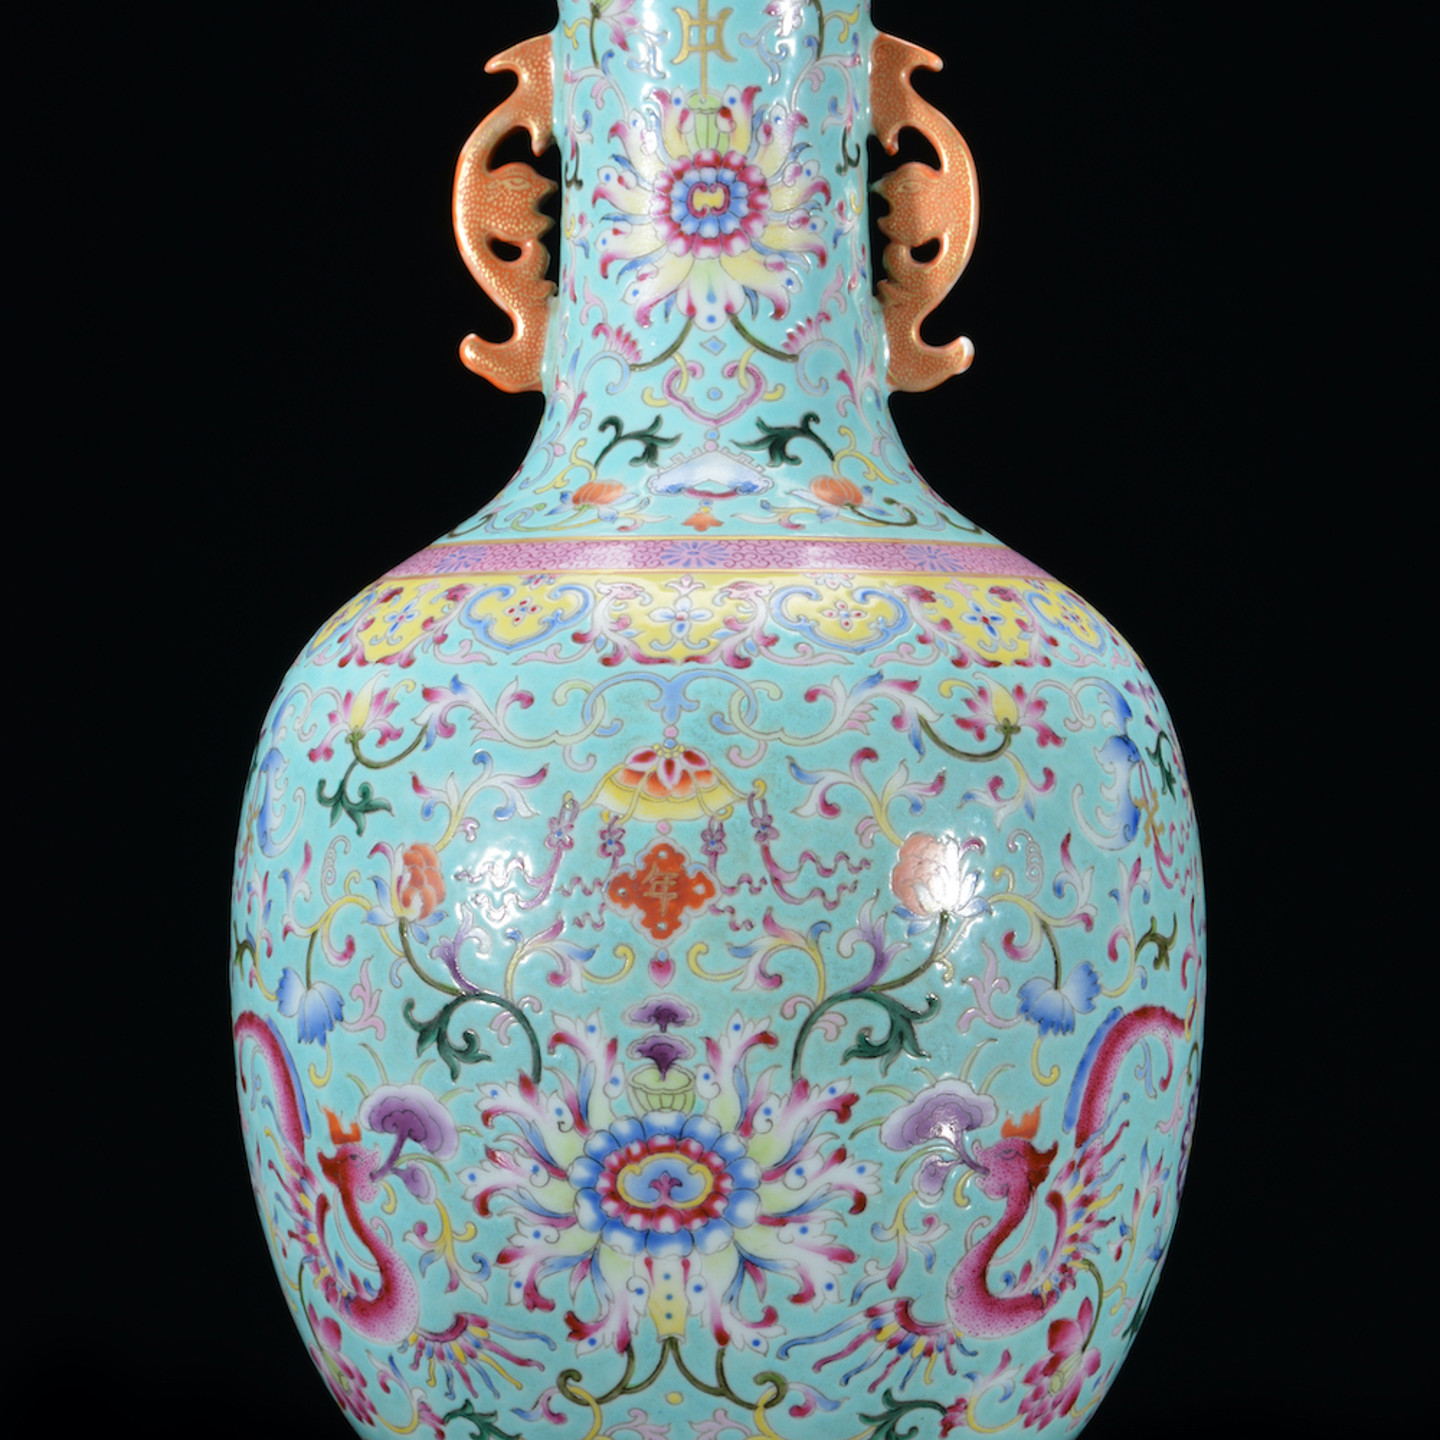 A Chinese Jiaqing Style Famille Rose Turquoise Ground Bottle Vase Sold £12,000